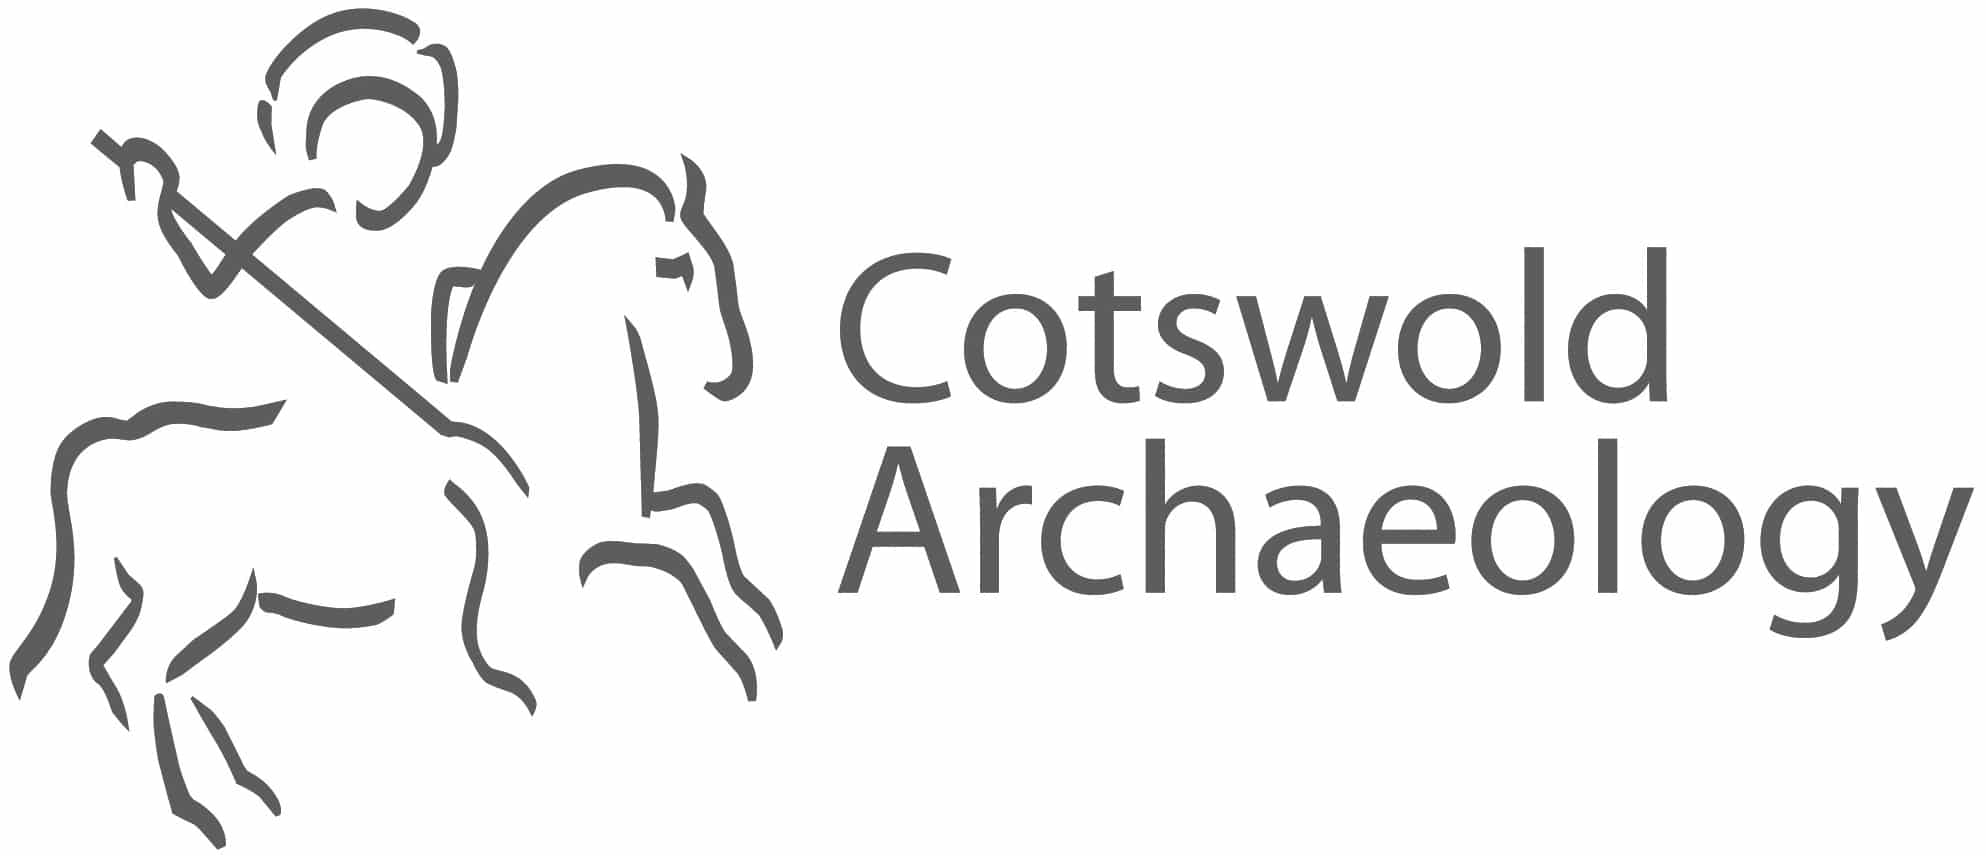 Cotswold Archaeology